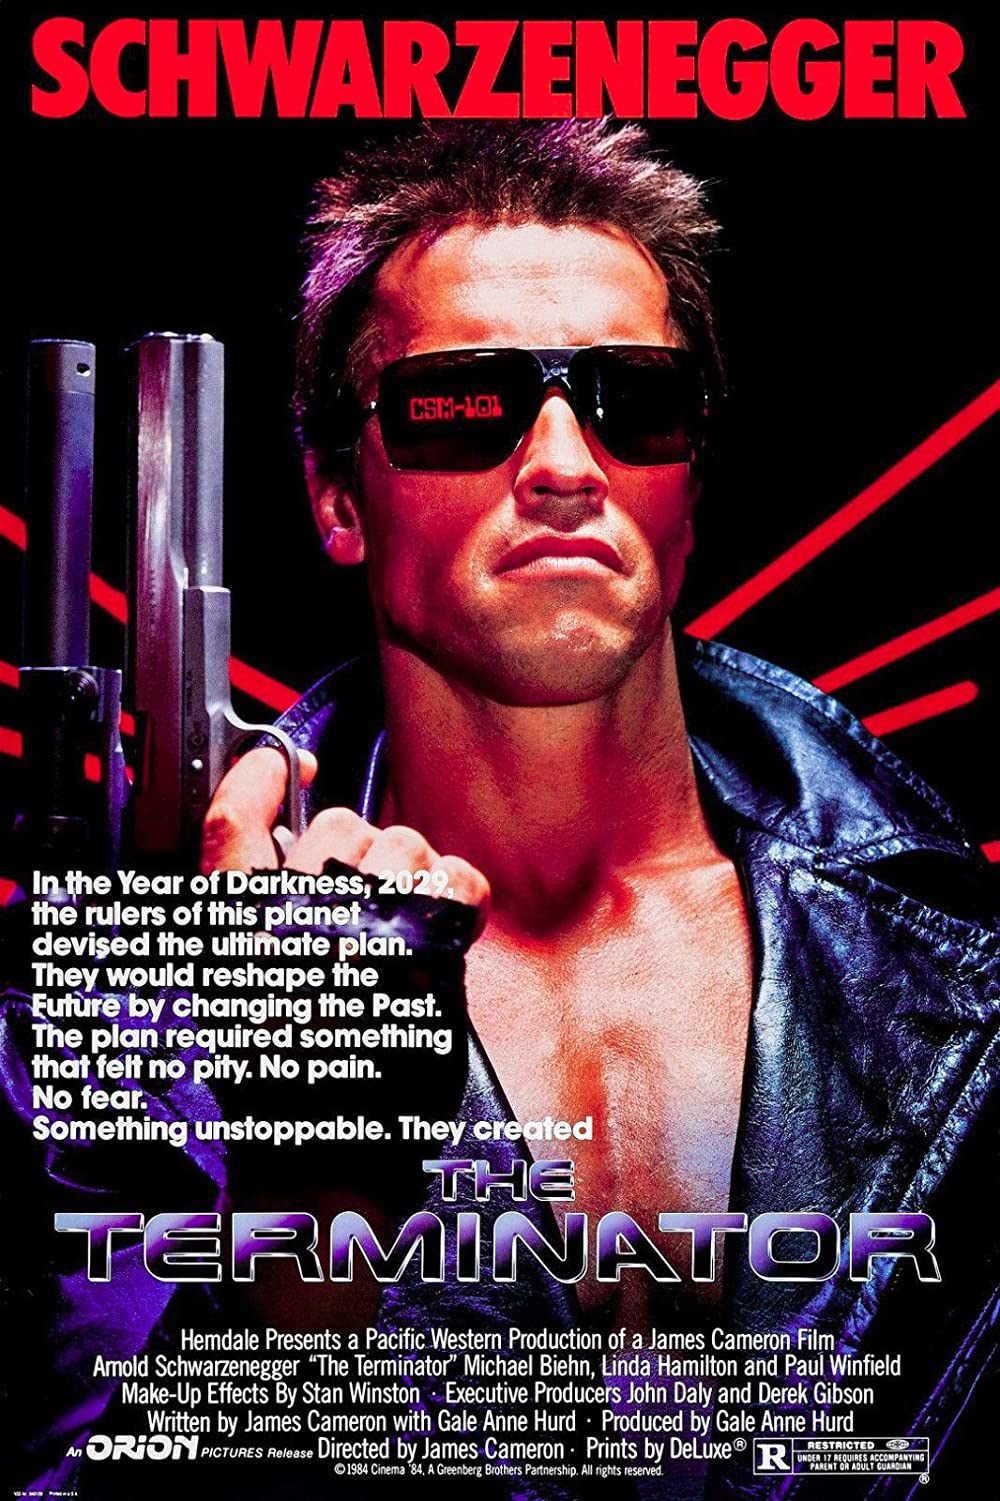 Poster for the movie Terminator